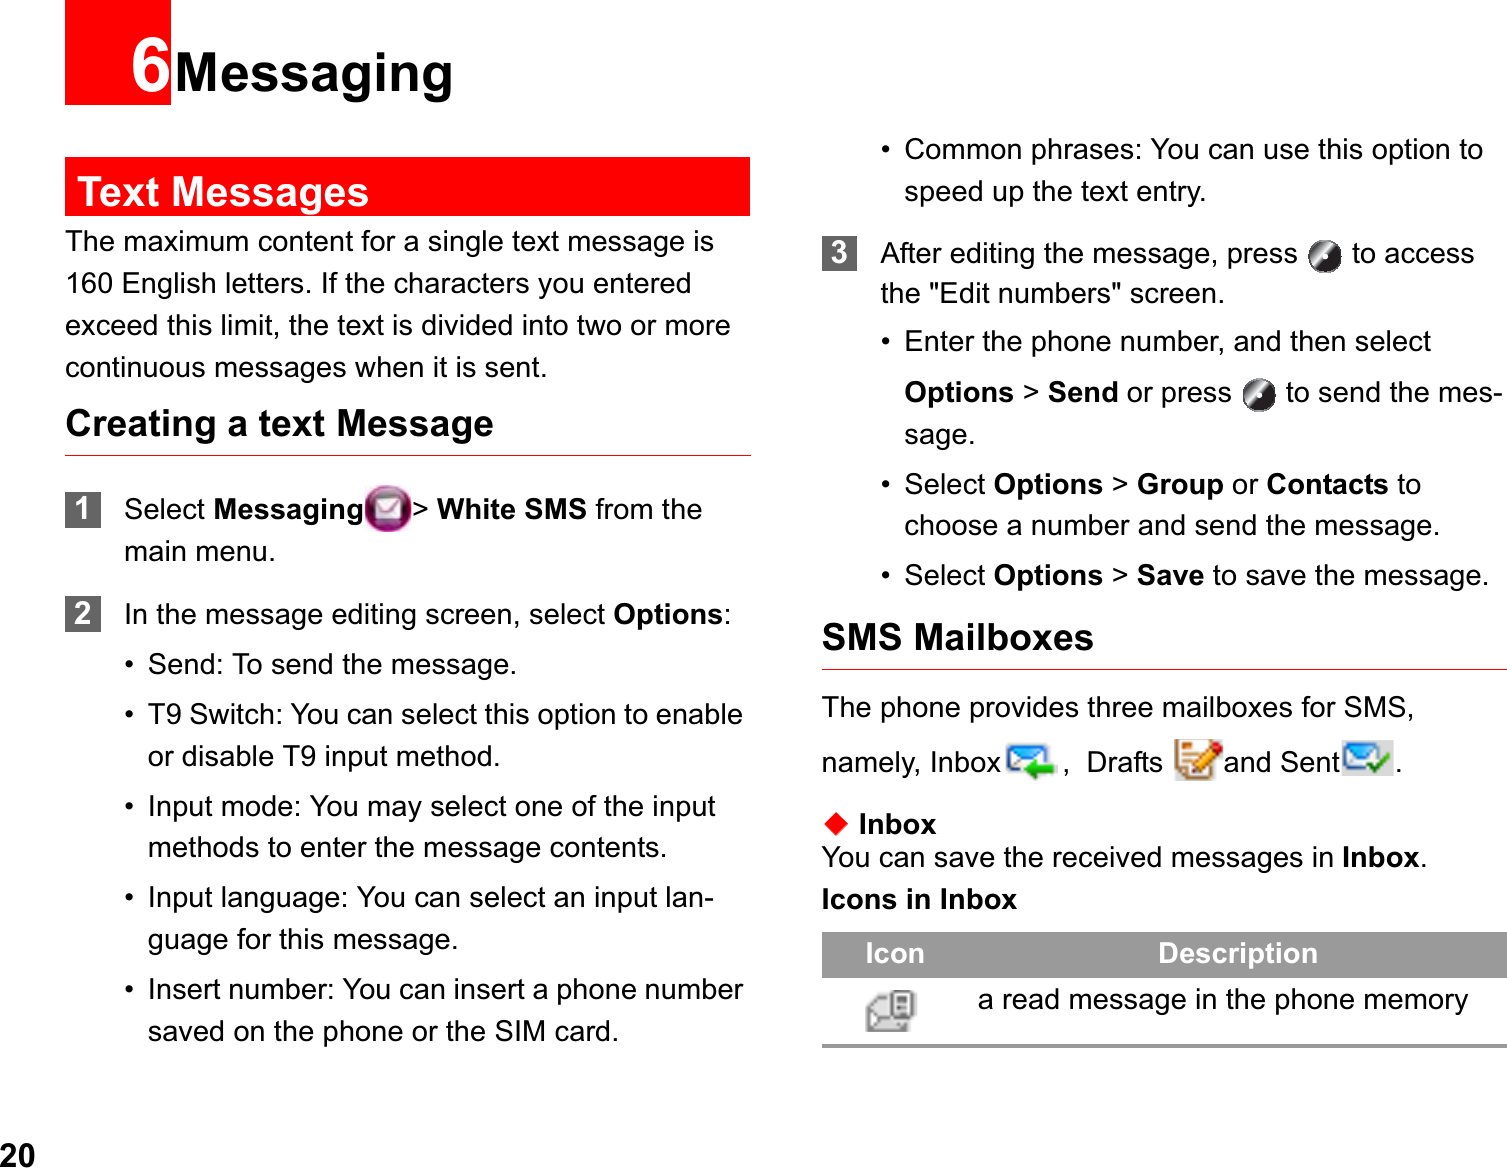 206MessagingText MessagesThe maximum content for a single text message is 160 English letters. If the characters you entered exceed this limit, the text is divided into two or more continuous messages when it is sent.Creating a text Message1Select Messaging &gt;White SMS from the main menu.2In the message editing screen, select Options:• Send: To send the message.• T9 Switch: You can select this option to enable or disable T9 input method.• Input mode: You may select one of the input methods to enter the message contents.• Input language: You can select an input lan-guage for this message.• Insert number: You can insert a phone number saved on the phone or the SIM card.• Common phrases: You can use this option to speed up the text entry.3After editing the message, press   to access the &quot;Edit numbers&quot; screen.• Enter the phone number, and then select Options &gt; Send or press   to send the mes-sage.• Select Options &gt; Group or Contacts to choose a number and send the message.• Select Options &gt; Save to save the message.SMS MailboxesThe phone provides three mailboxes for SMS, namely, Inbox ,  Drafts  and Sent .ƹInboxYou can save the received messages in Inbox.Icons in InboxIcon Descriptiona read message in the phone memory